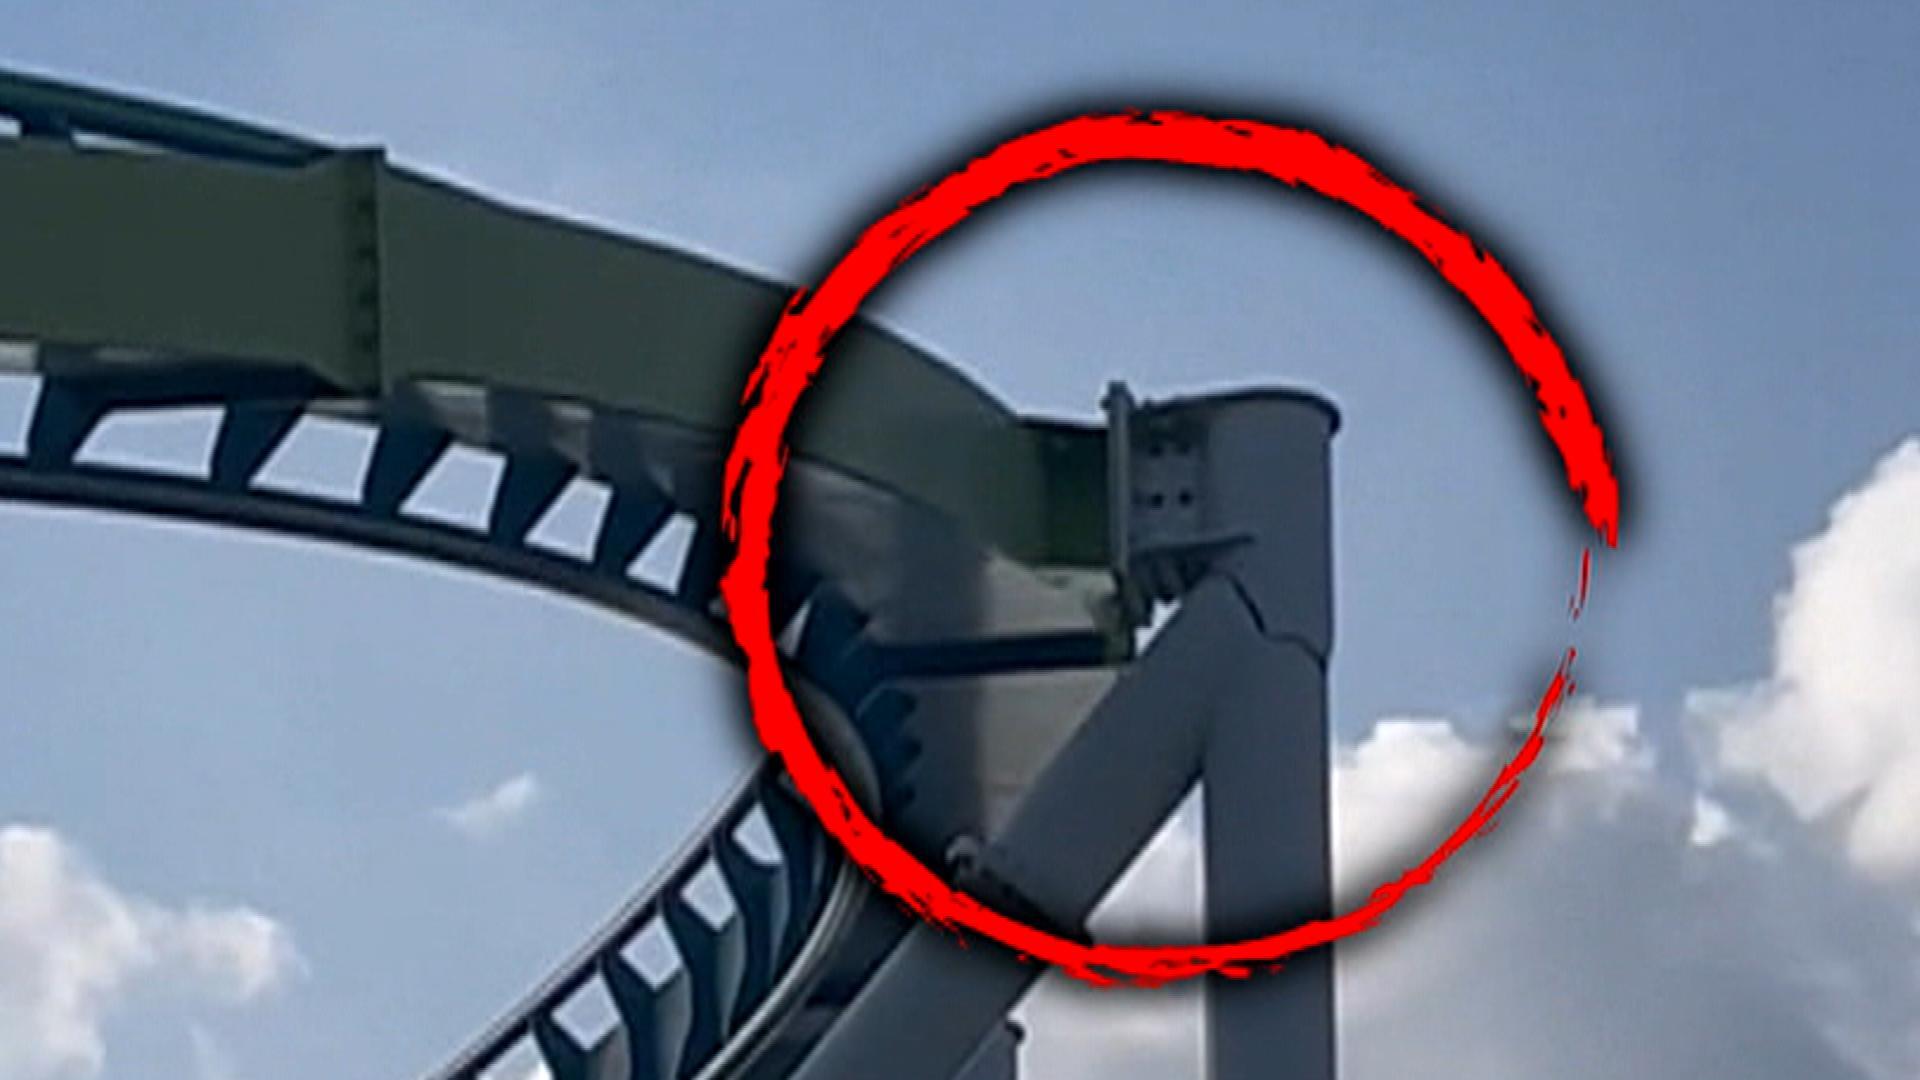 Dad Finds Beam Crack on 'Tallest, Fastest' Roller Coaster in Country